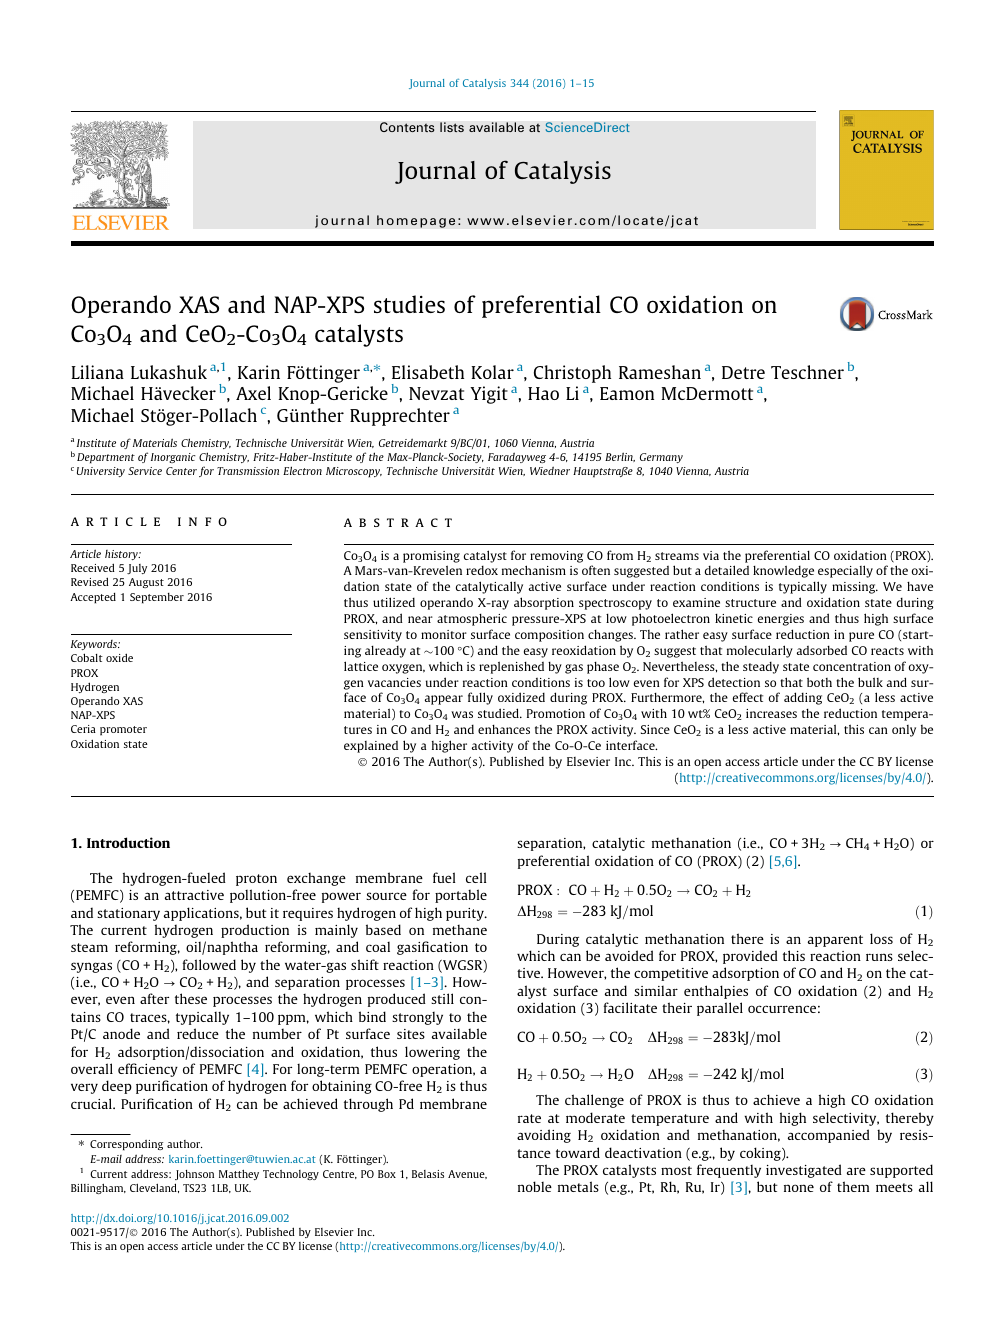 Operando Xas And Nap Xps Studies Of Preferential Co Oxidation On Co3o4 And Ceo2 Co3o4 Catalysts Topic Of Research Paper In Chemical Sciences Download Scholarly Article Pdf And Read For Free On Cyberleninka